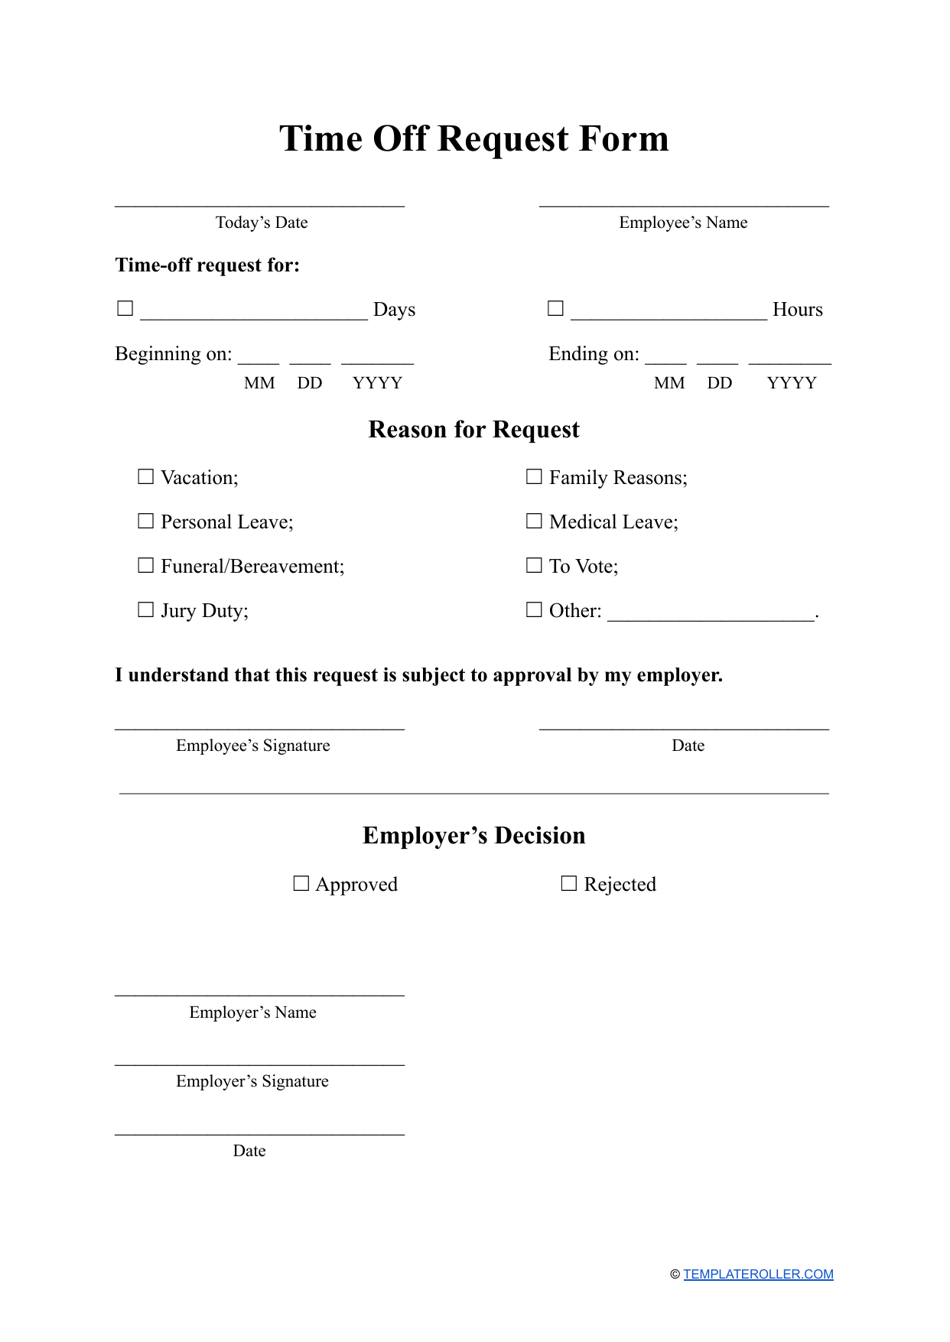 Time off Request Form Fill Out, Sign Online and Download PDF